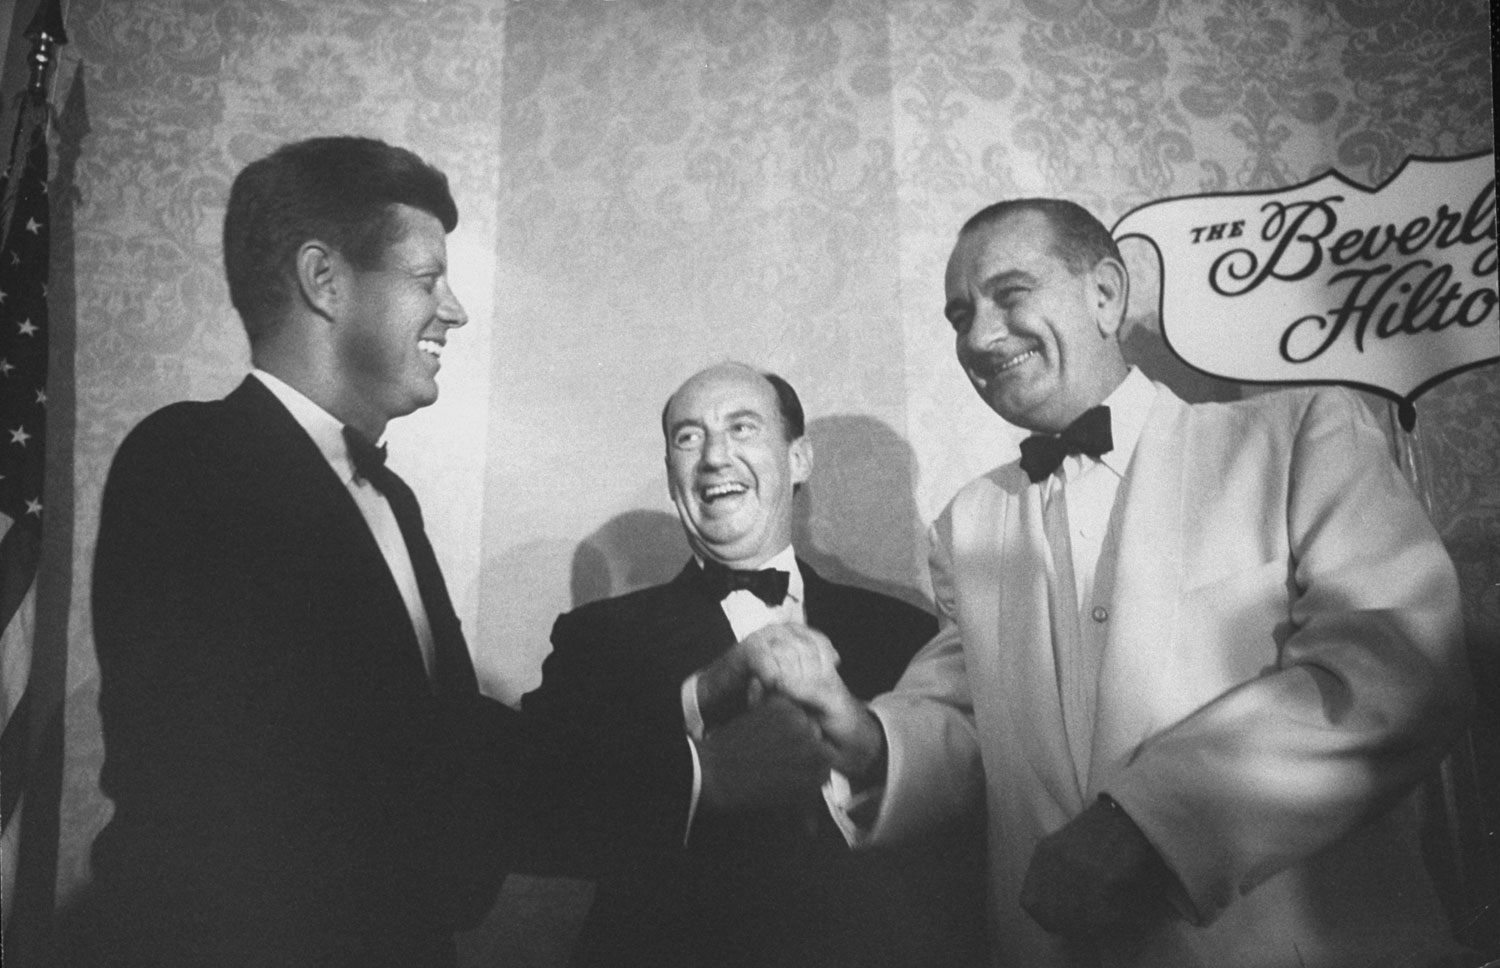 Adlai Stevenson (center) and Lyndon Johnson (right) congratulate John F. Kennedy on winning the party's presidential nomination at the 1960 Democratic National Convention in Los Angeles.